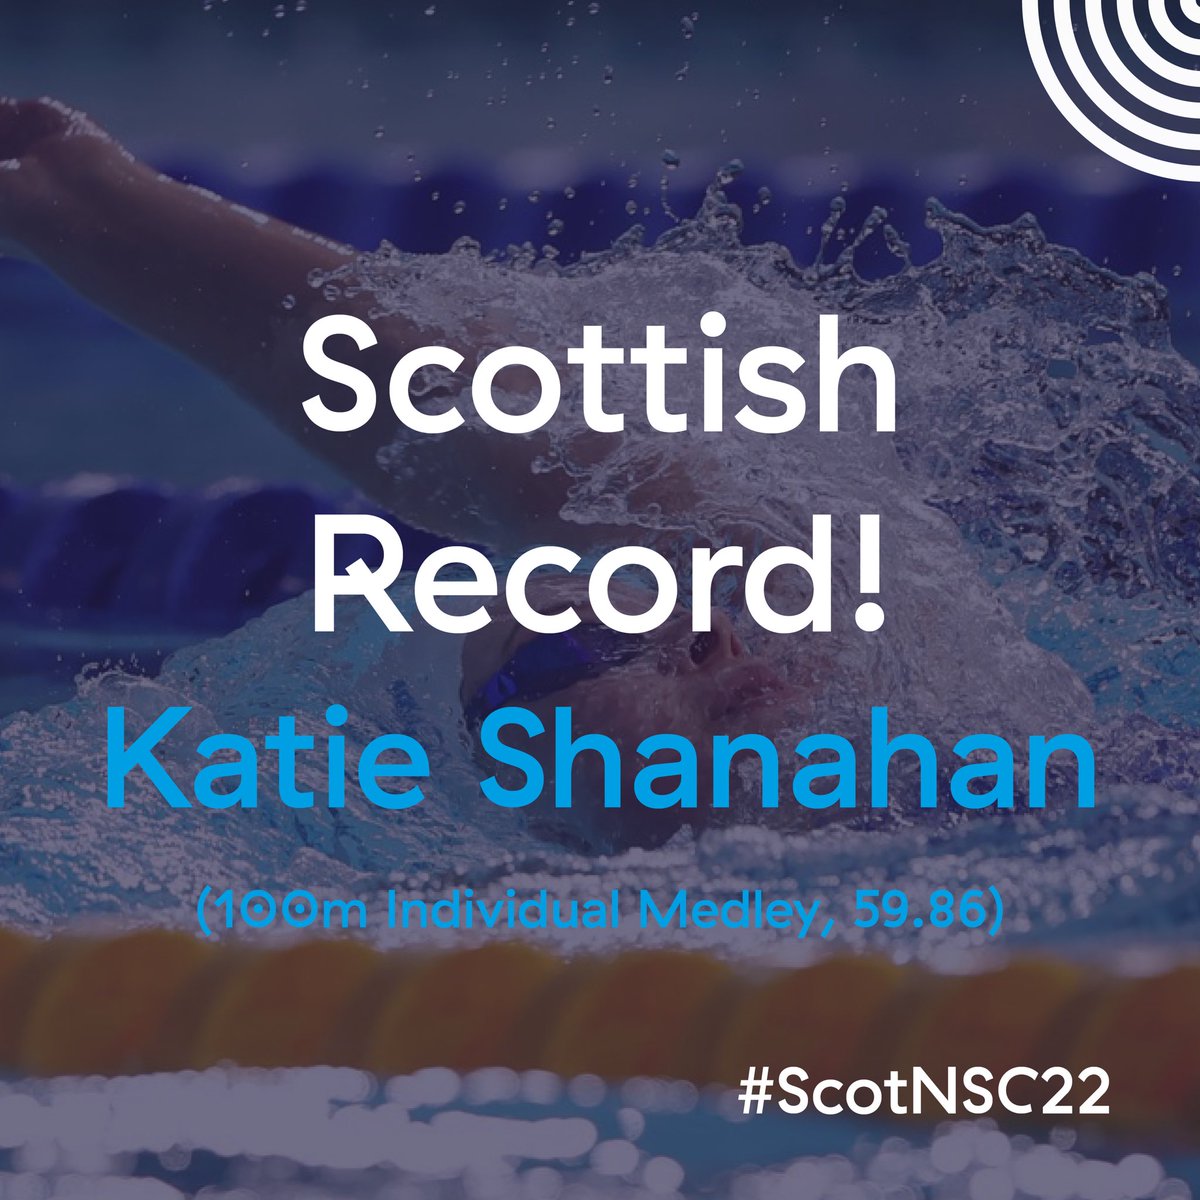 Wow! What a swim 👏🔥 Katie Shanahan becomes the first Scottish woman in history to do a sub-60 second 100m IM in 59.86🏴󠁧󠁢󠁳󠁣󠁴󠁿 Shout-out to Katie Goodburn who also dipped inside the pre-existing Scottish Record, finishing second 💪 #ScotNSC22